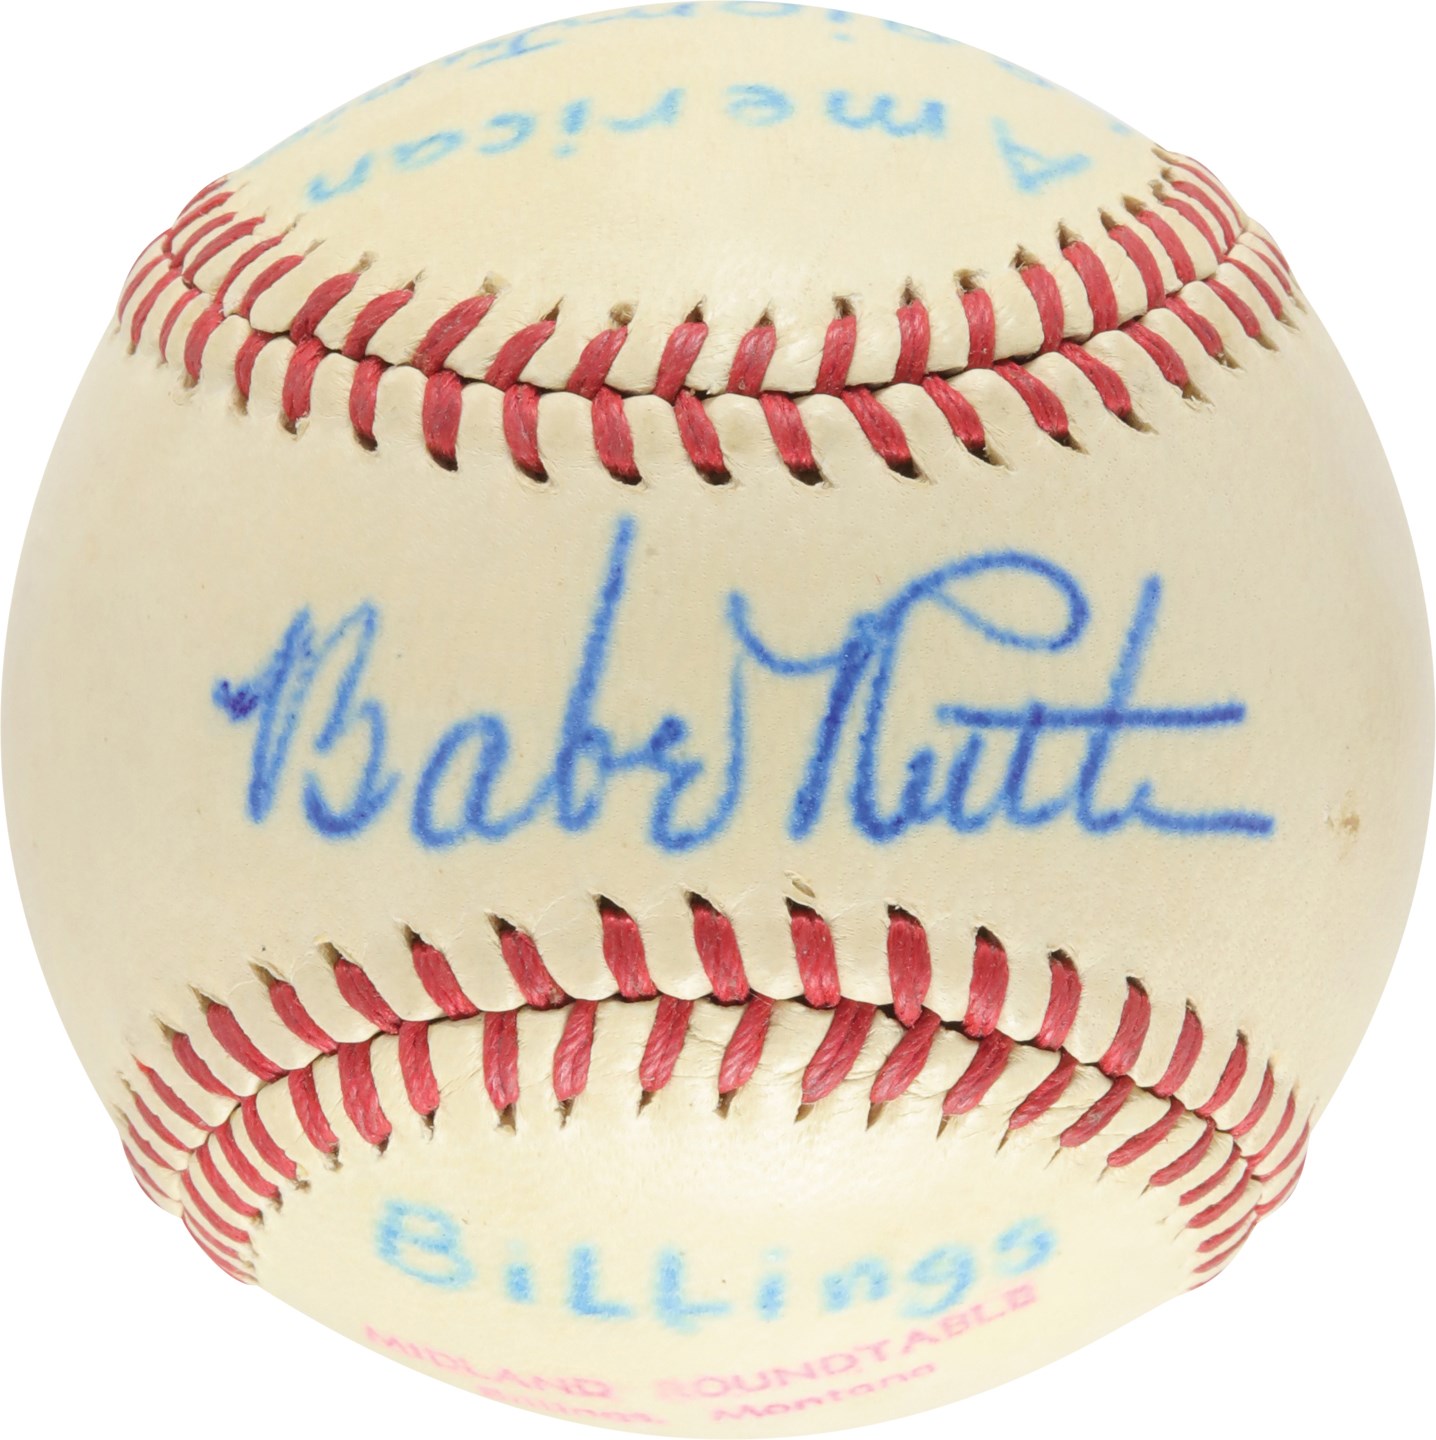 Ruth and Gehrig - unning 1947 Babe Ruth Single-Signed Baseball with Impeccable Provenance (PSA MINT 9 Auto)